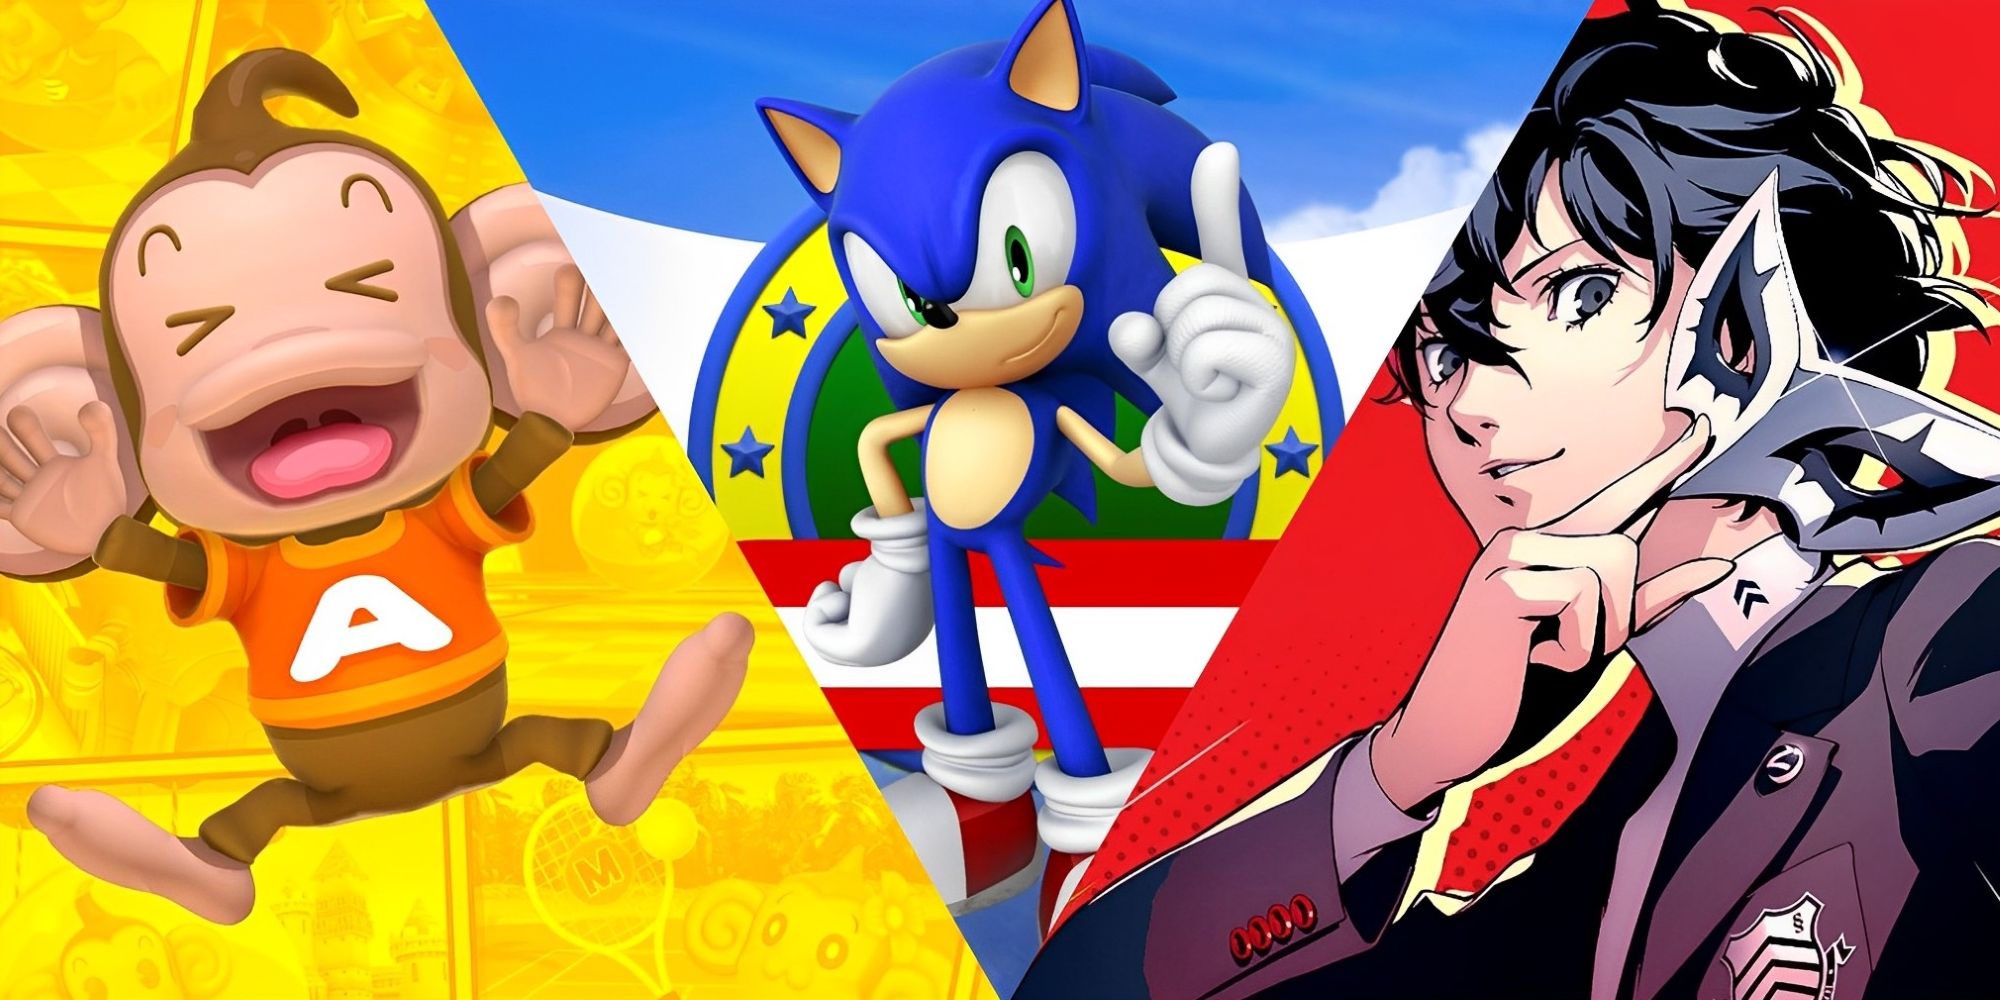 AiAi from Super Monkey Ball, Joker from Persona 5 Royal, and Sonic standing together